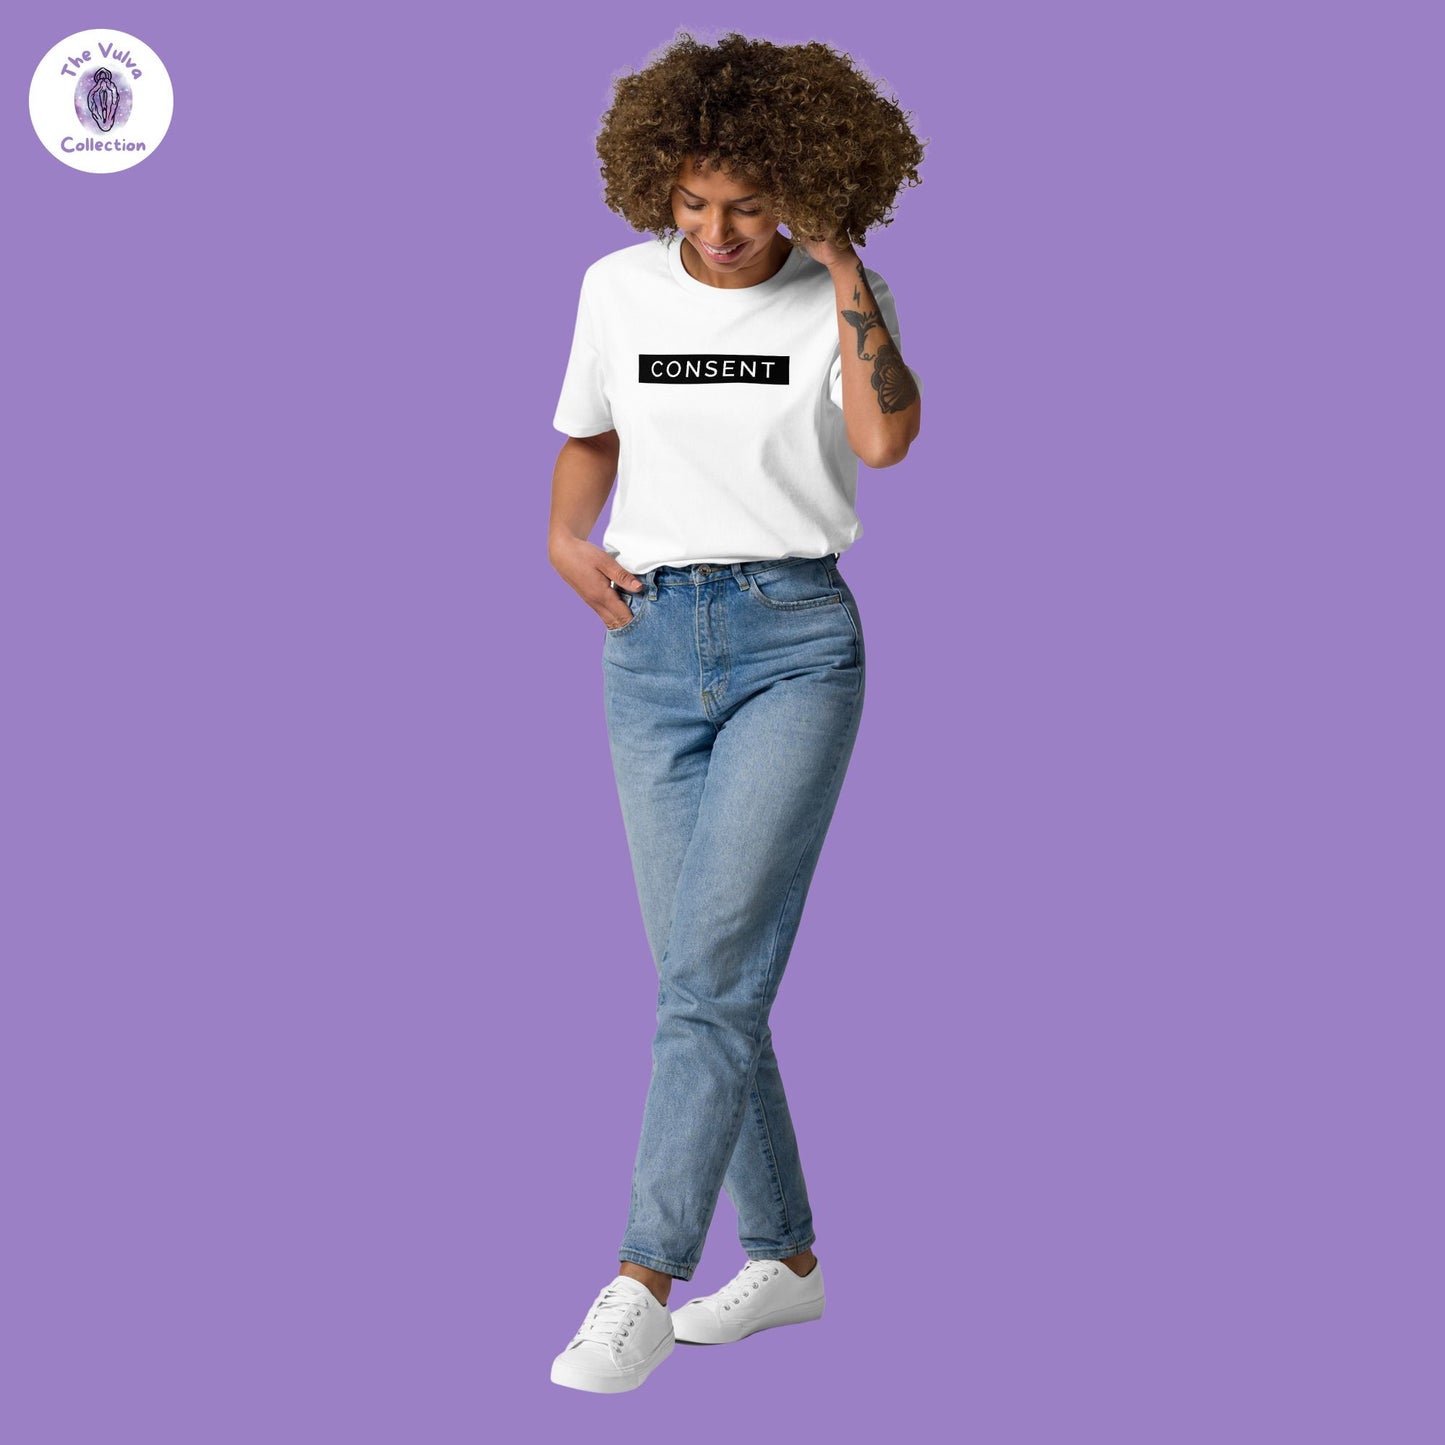 Consent is Simple Unisex Fit Organic T-Shirt